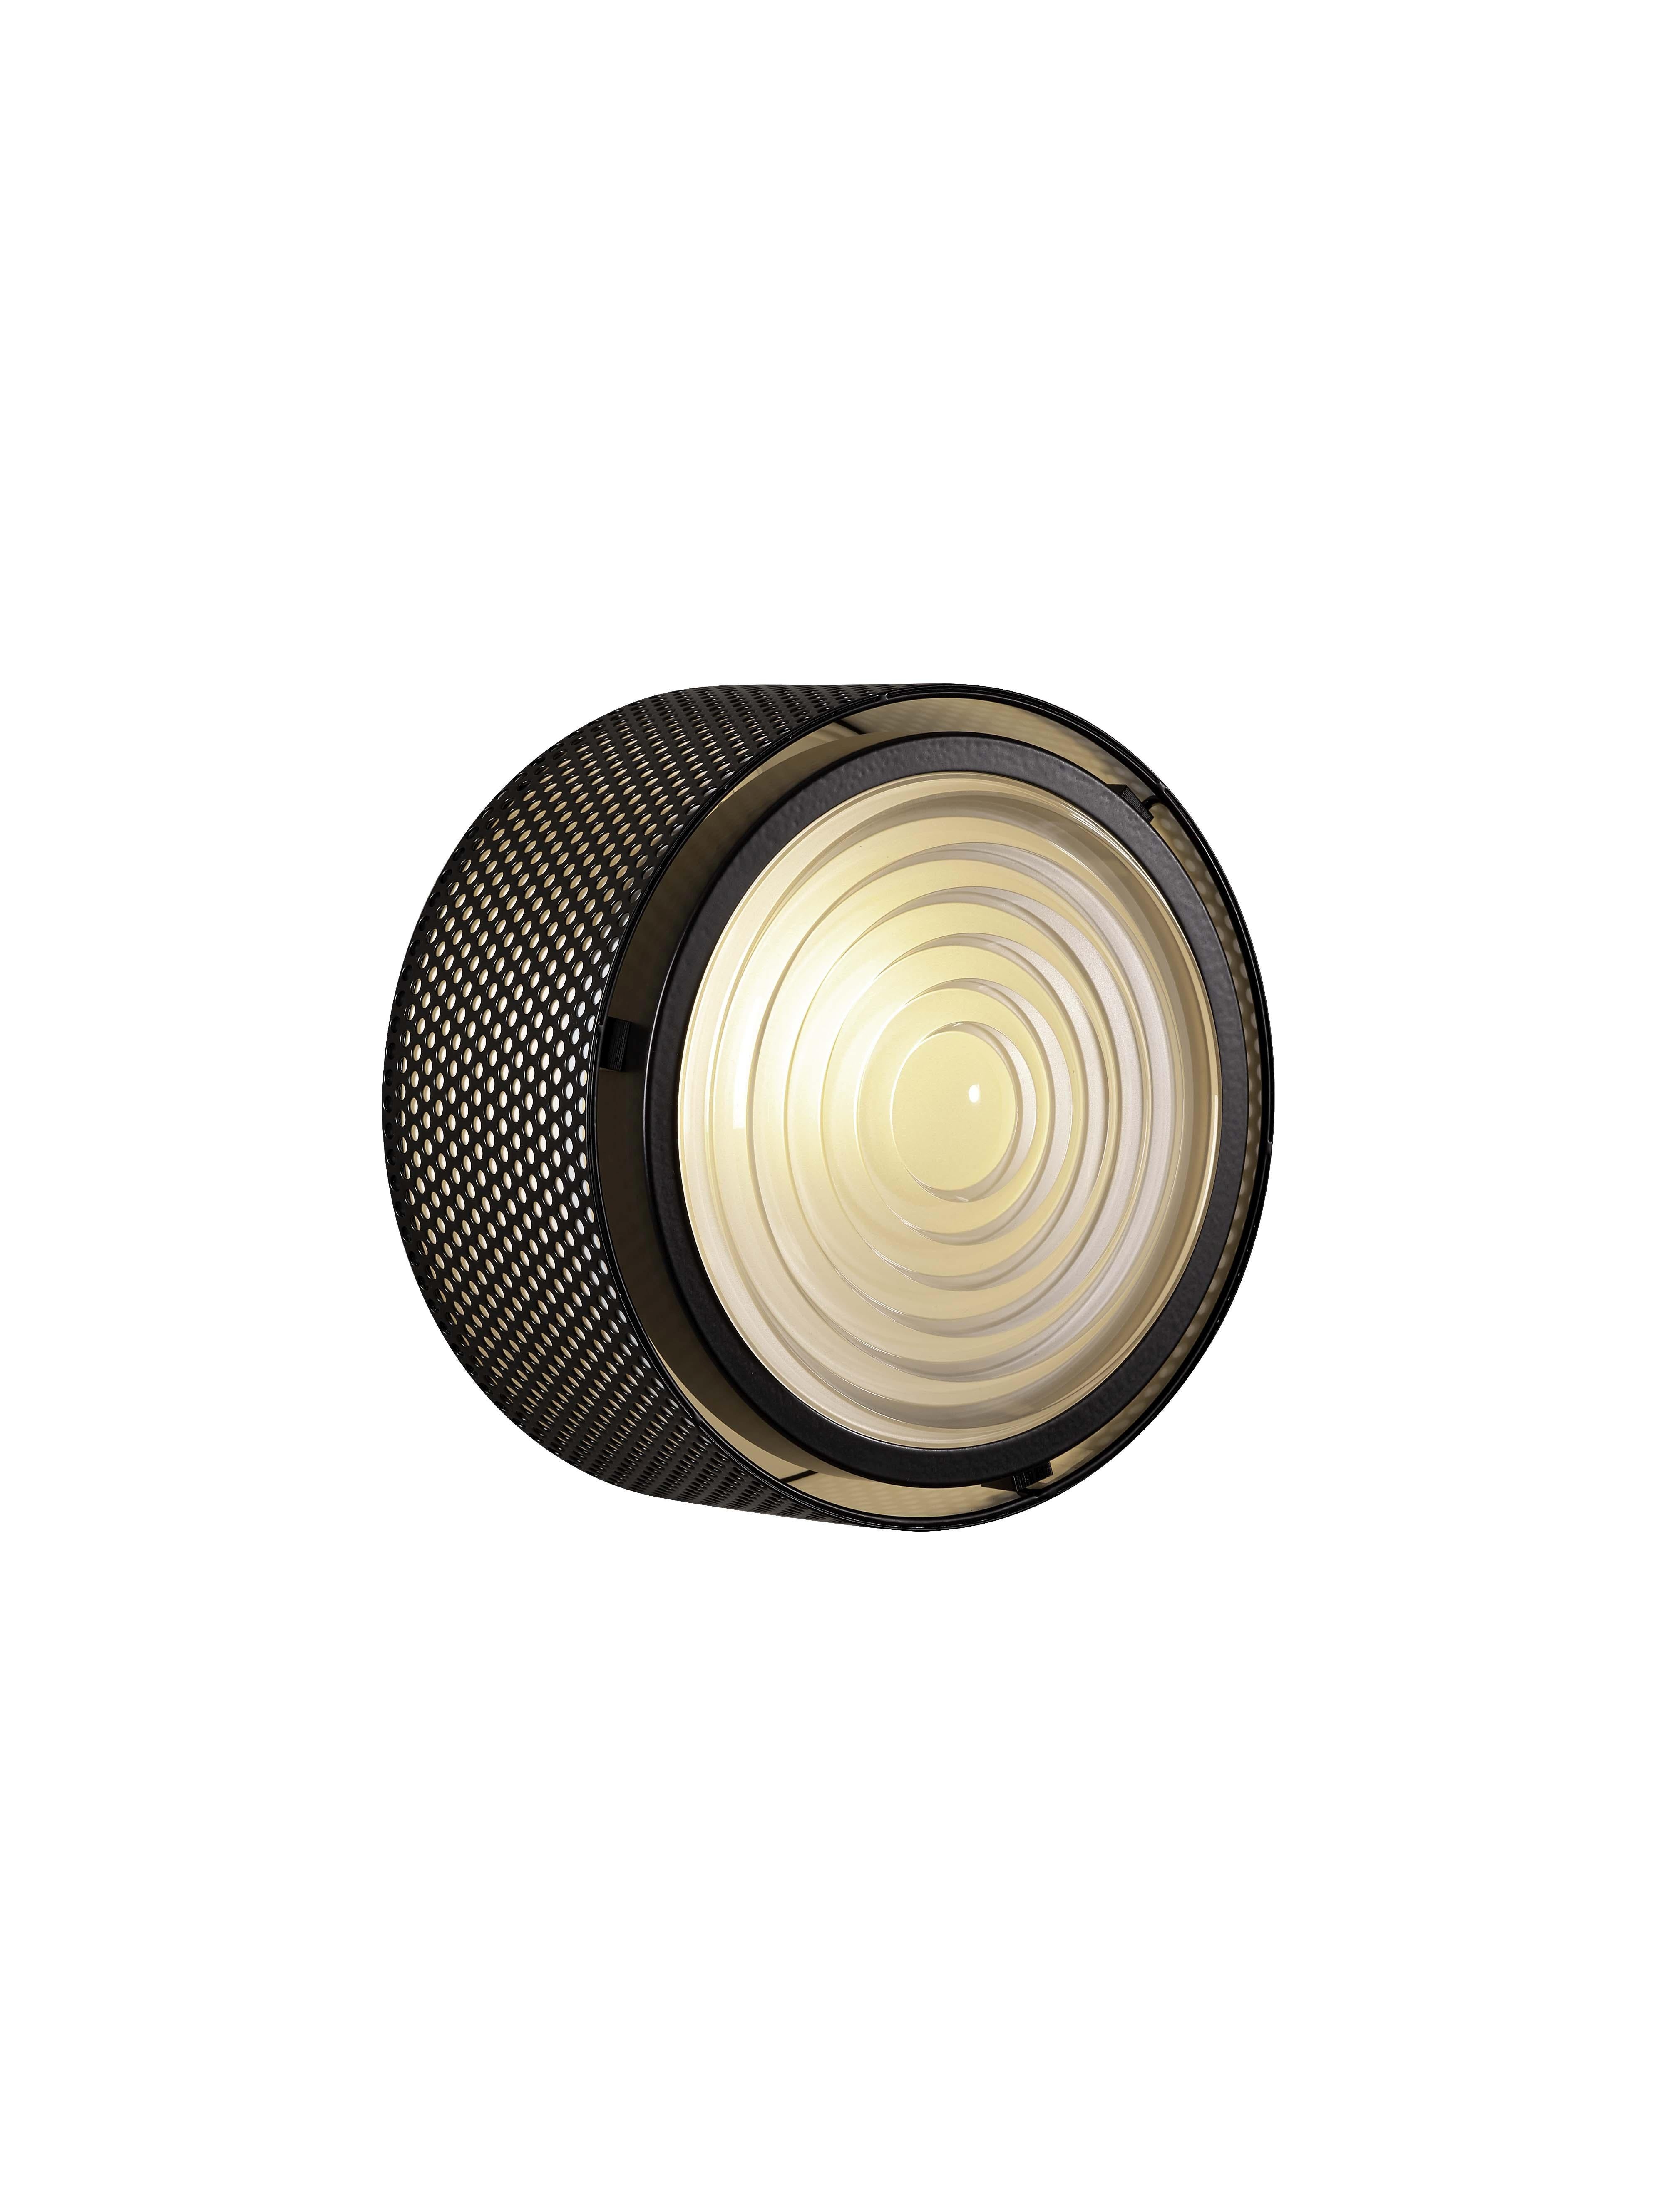 Pierre Guariche 'G13' Wall or Ceiling Light for Sammode Studio in Black For Sale 2